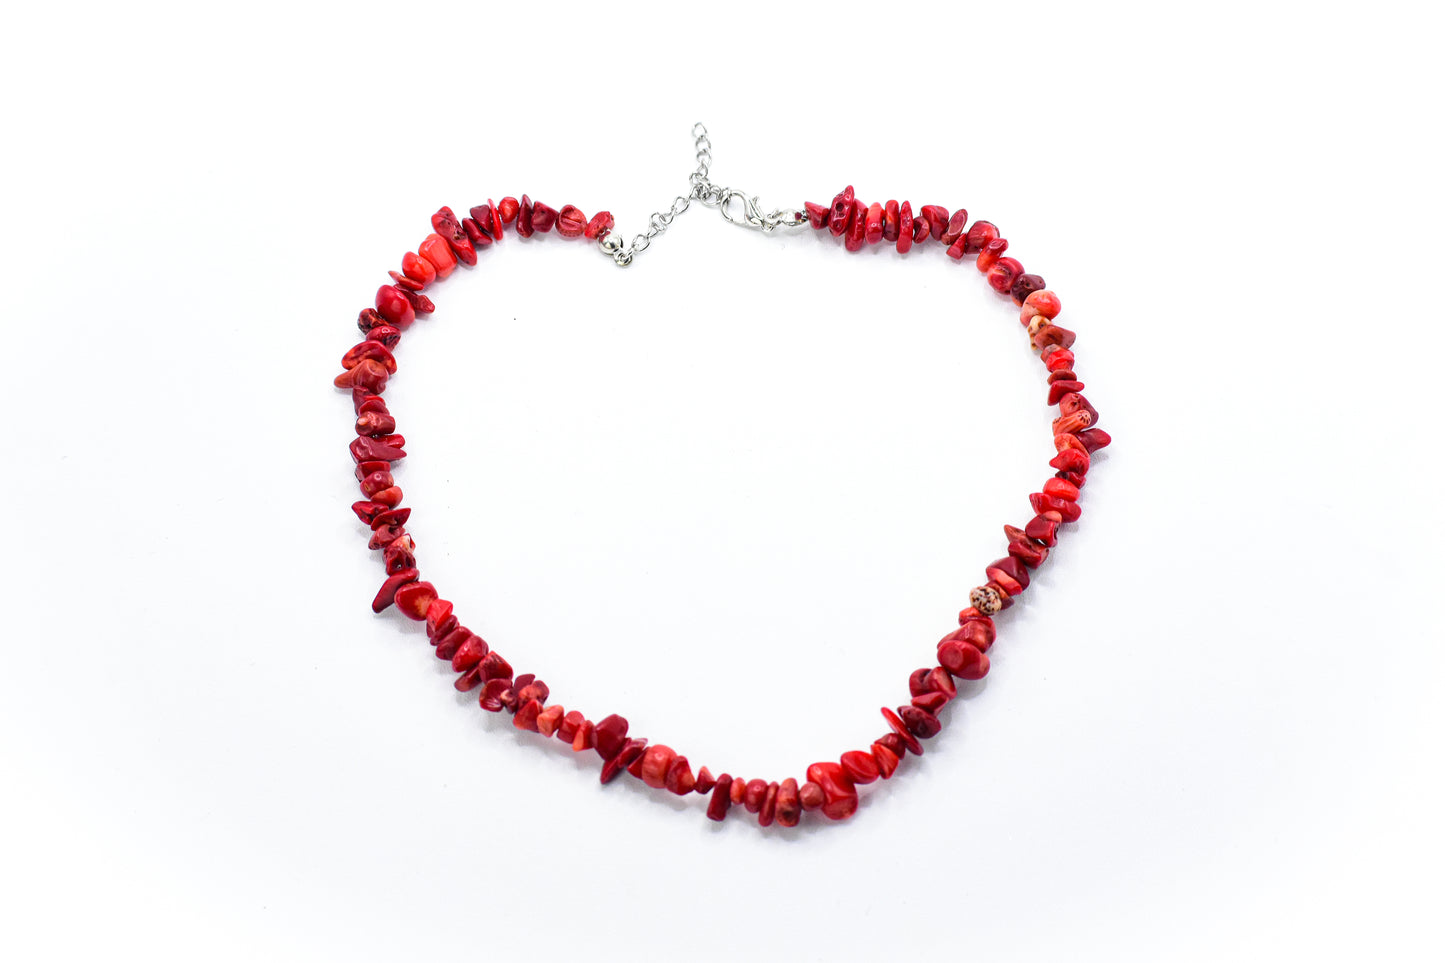 Raw red coral necklace